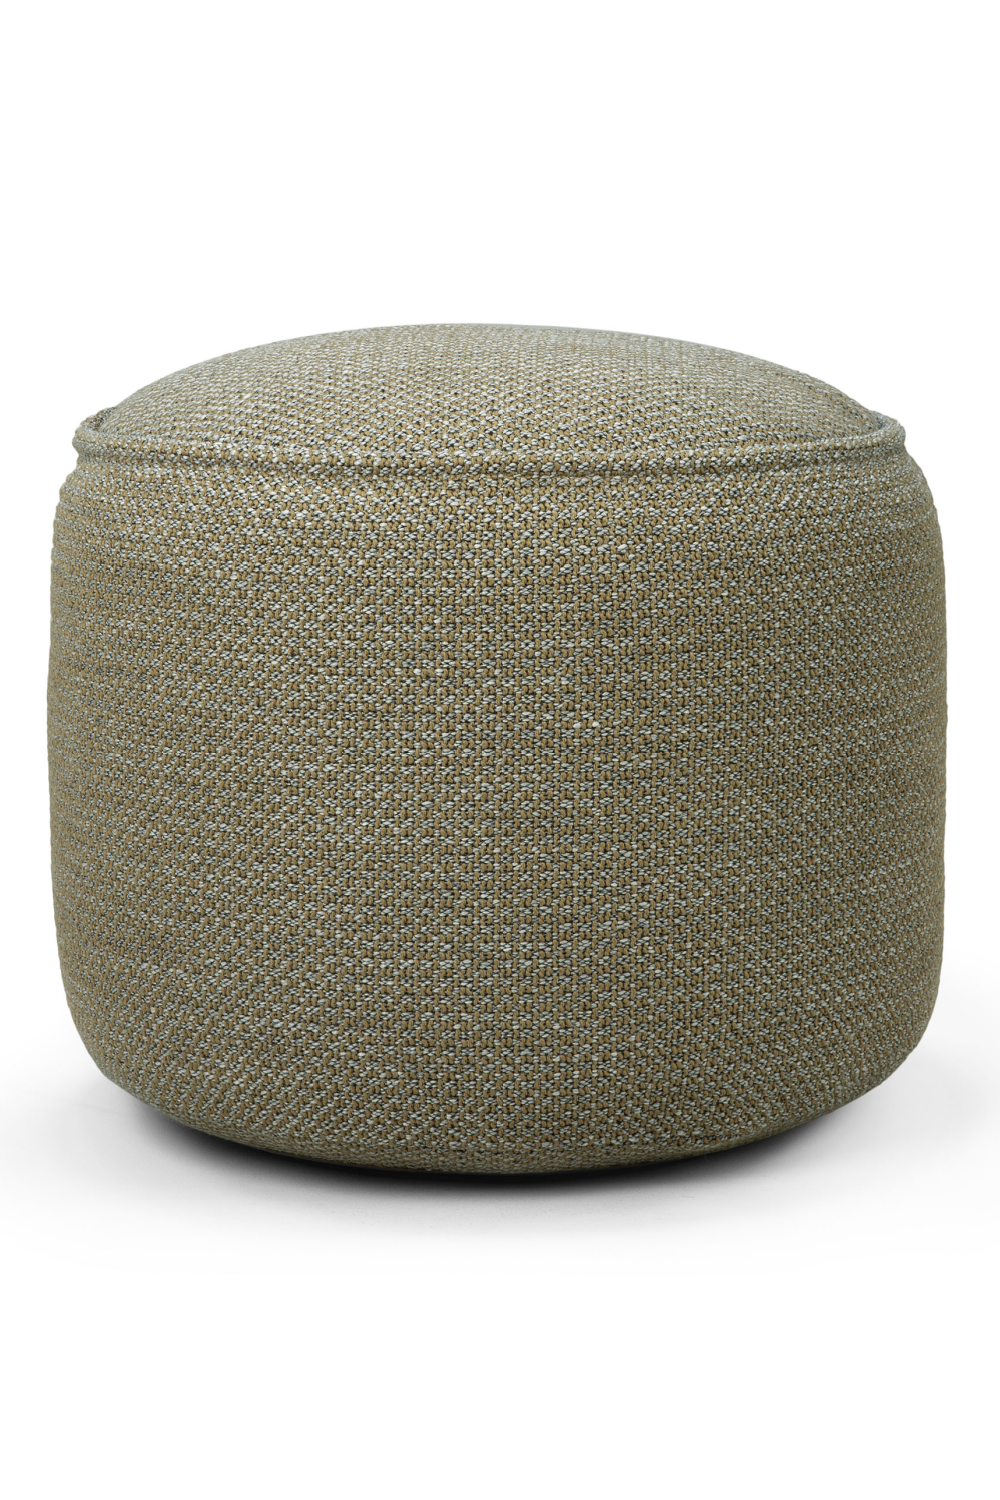 Round Outdoor Pouf | Ethnicraft Donut | Woodfurniture.com